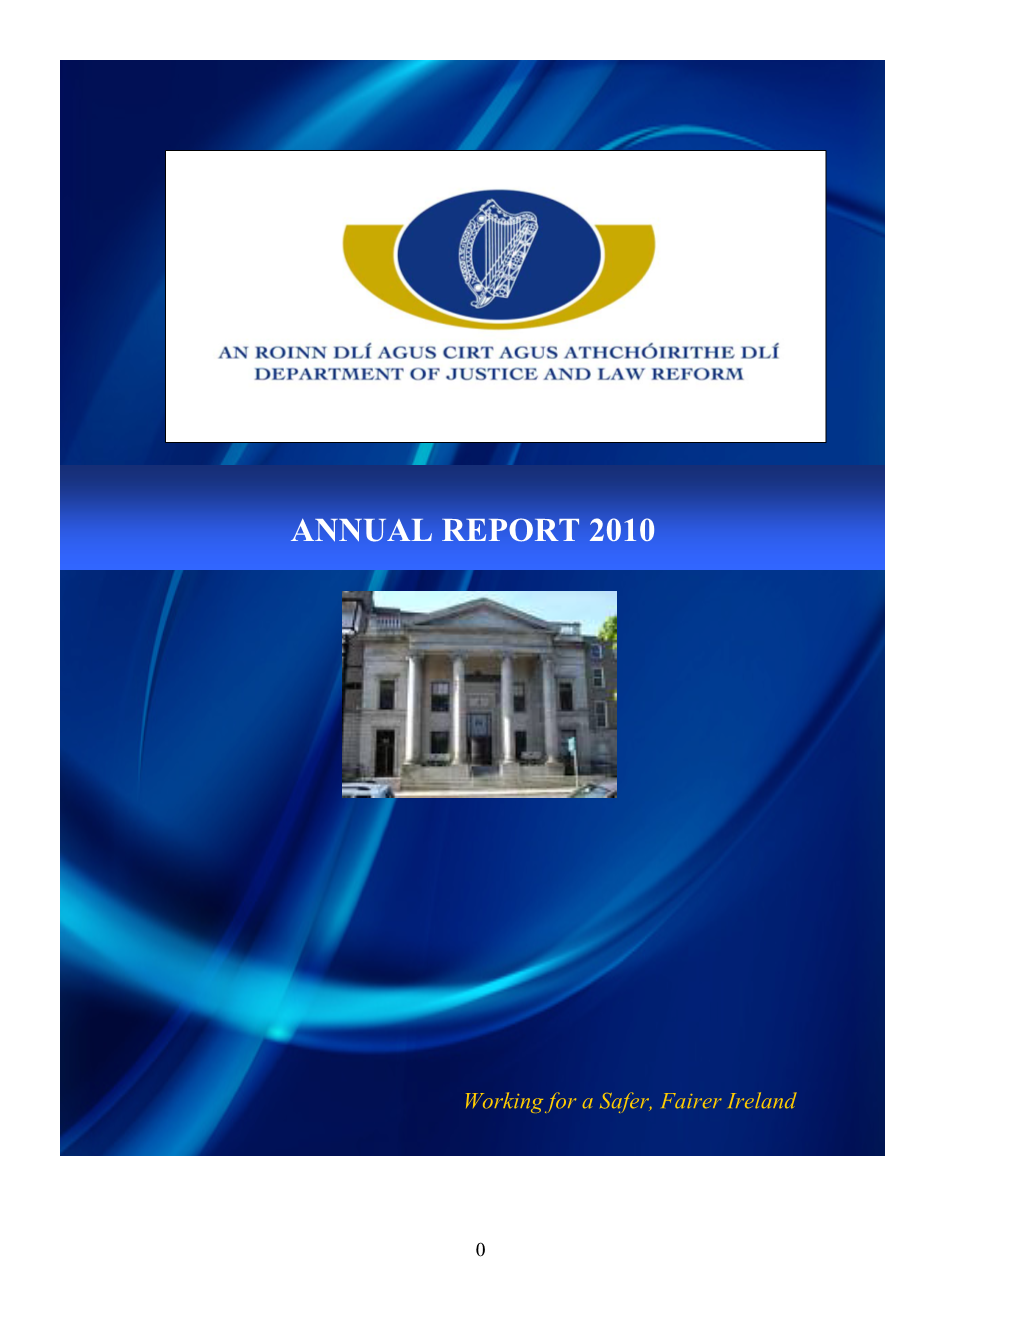 Department of Justice and Law Reform Annual Report 2010